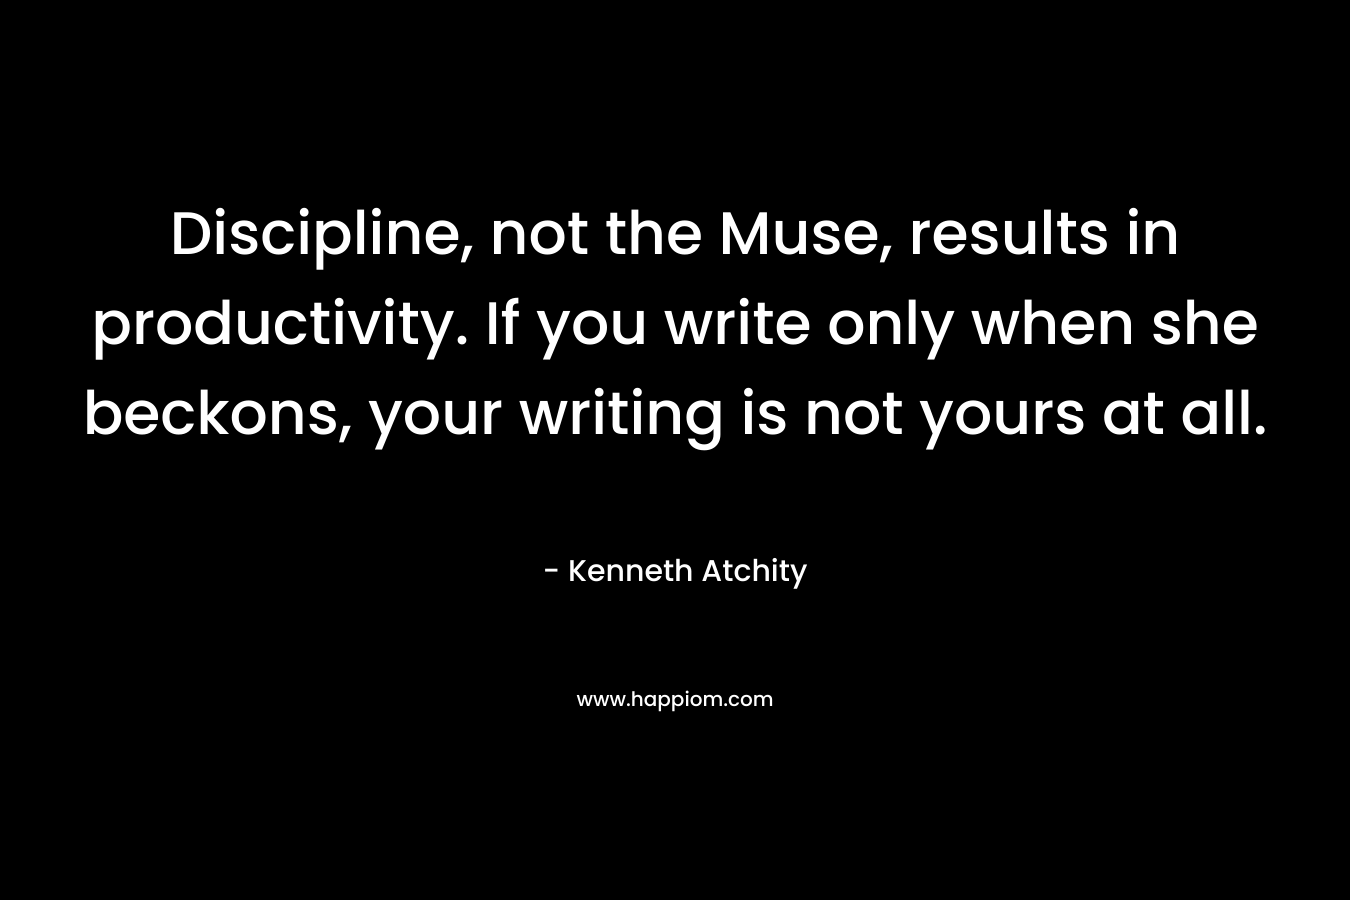 Discipline, not the Muse, results in productivity. If you write only when she beckons, your writing is not yours at all.